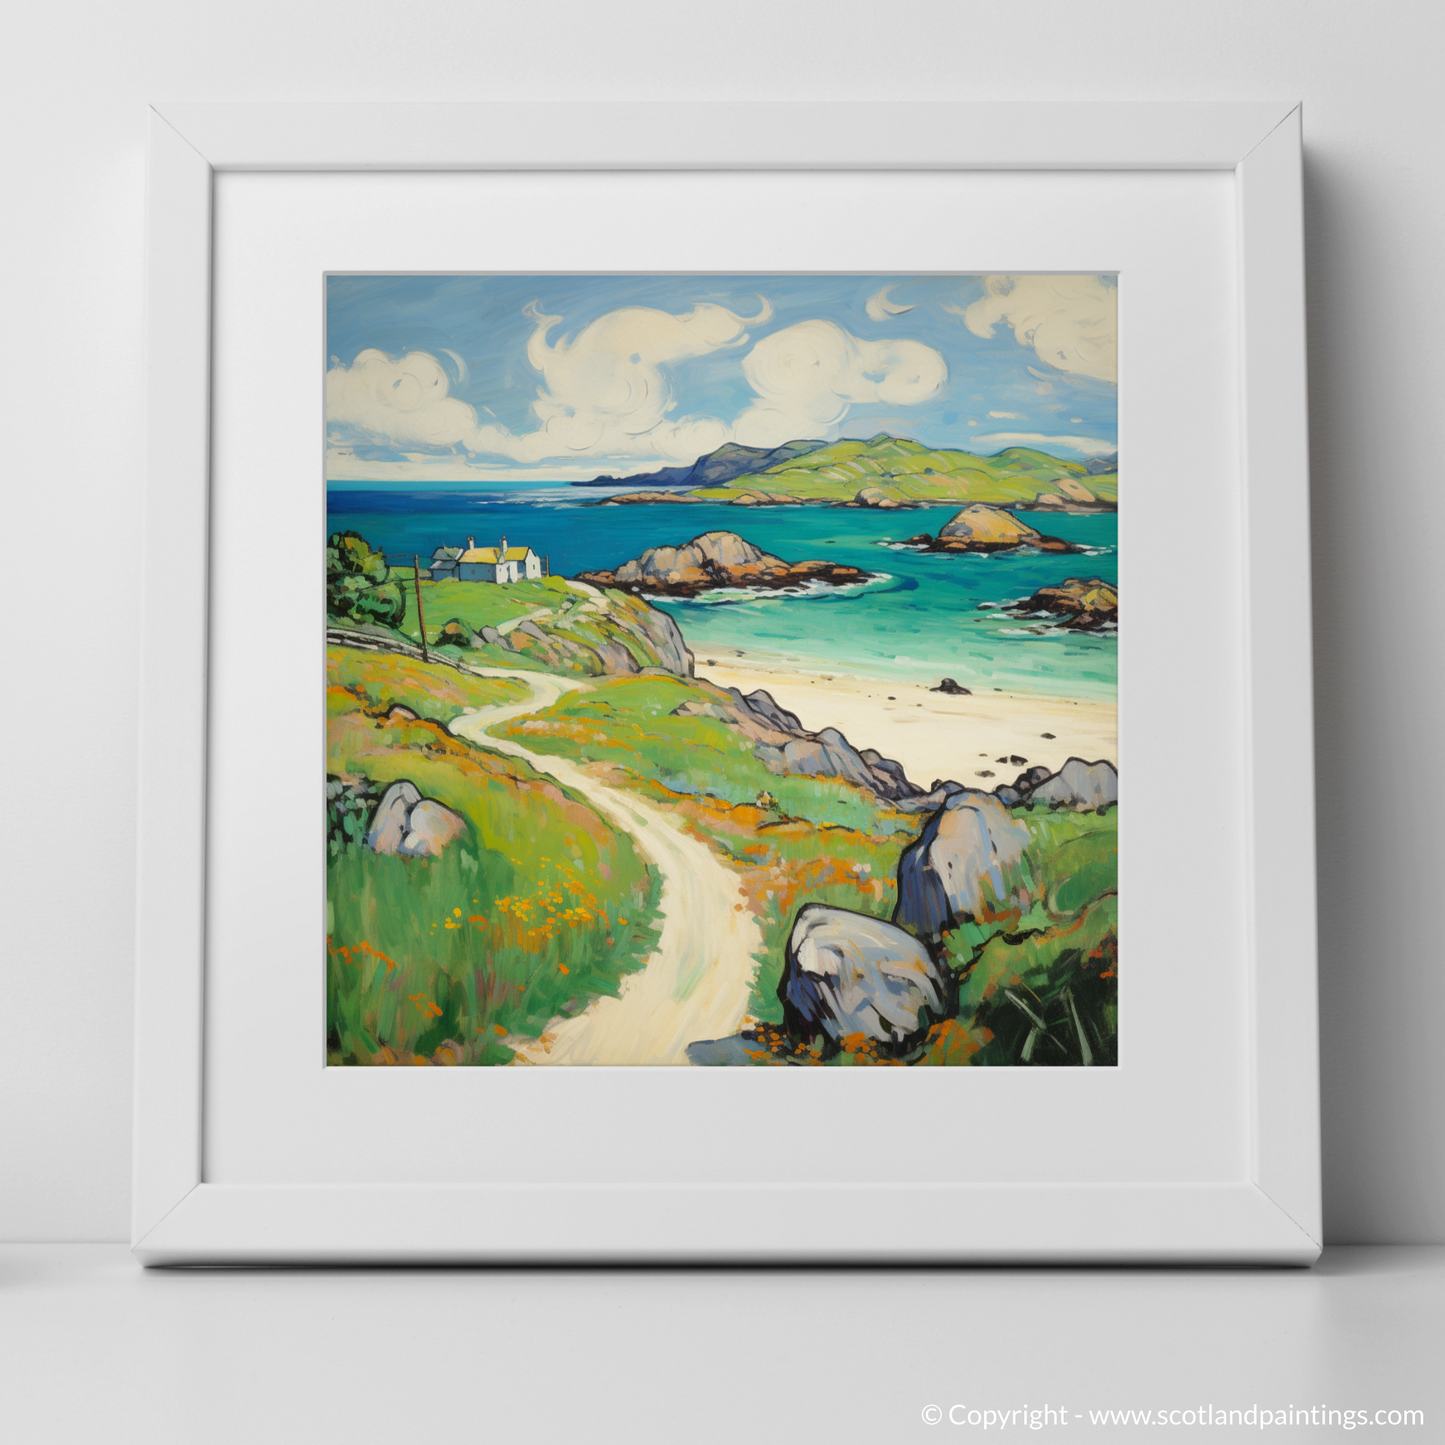 Art Print of Isle of Iona, Inner Hebrides in summer with a white frame